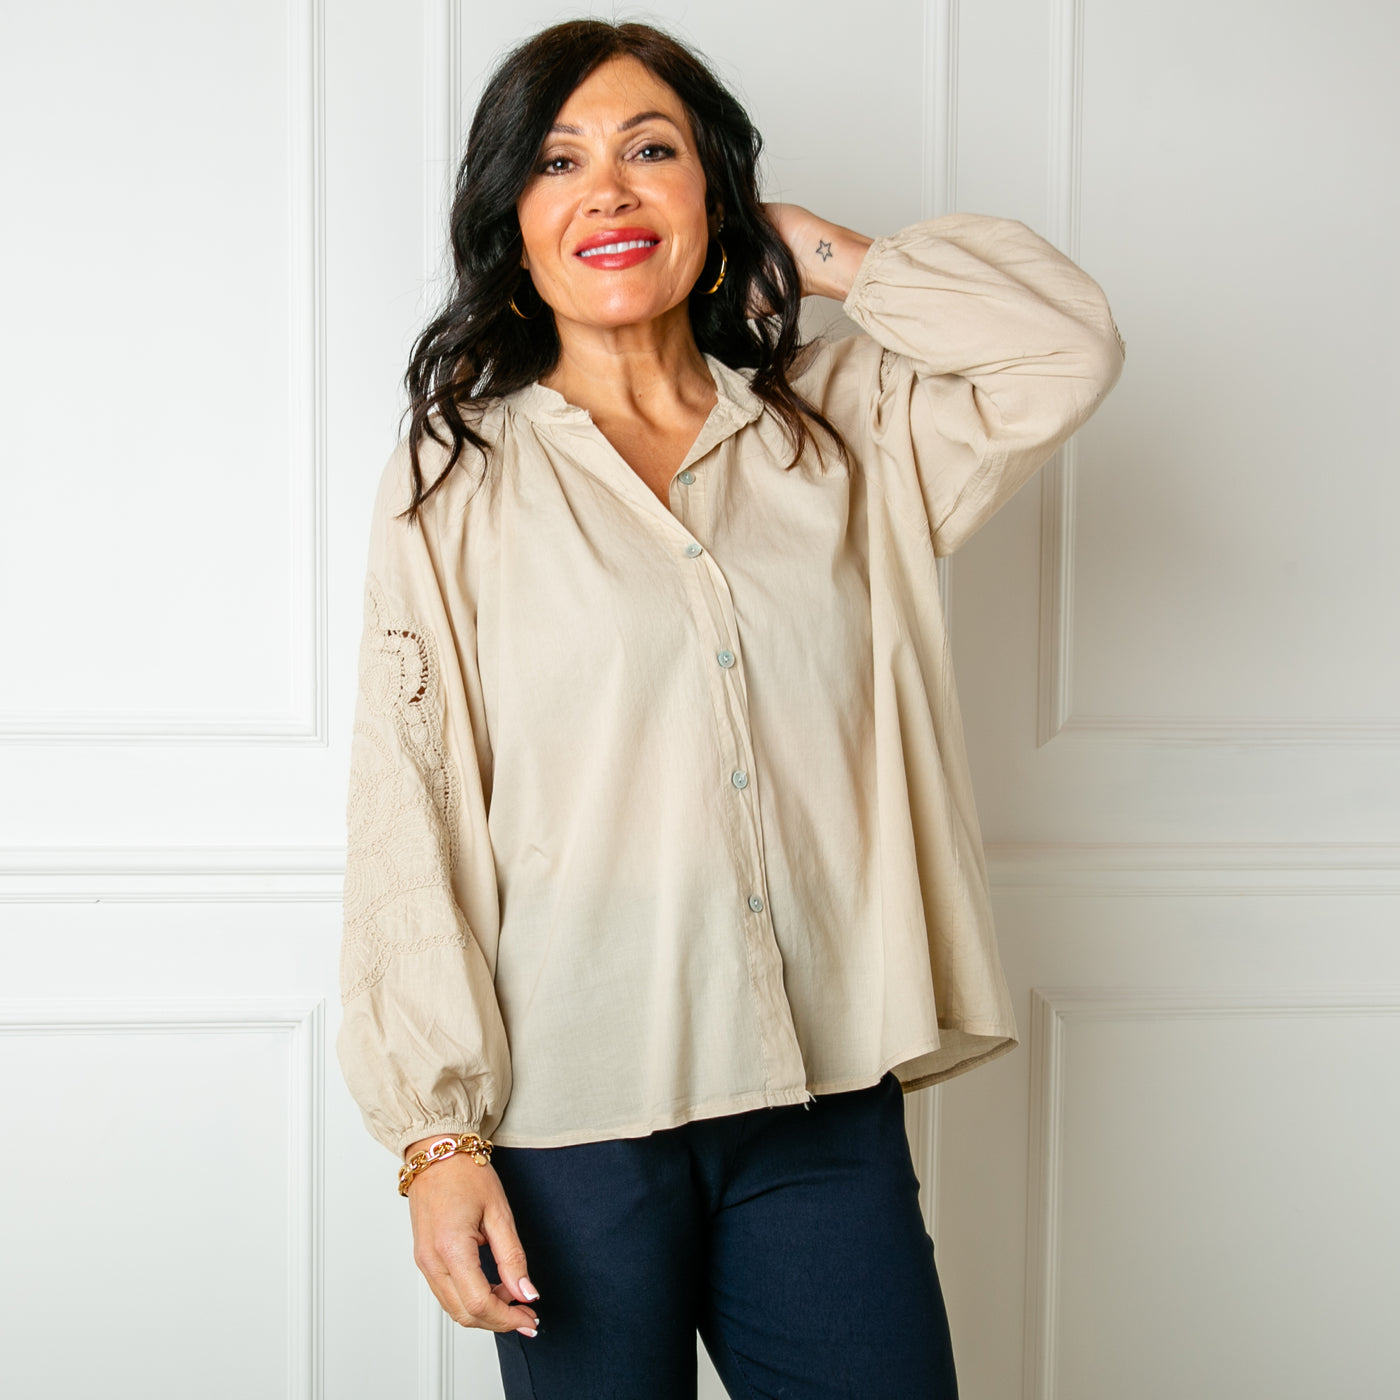 The stone cream Balloon Sleeve Shirt with a collarless V neckline and buttons down the front